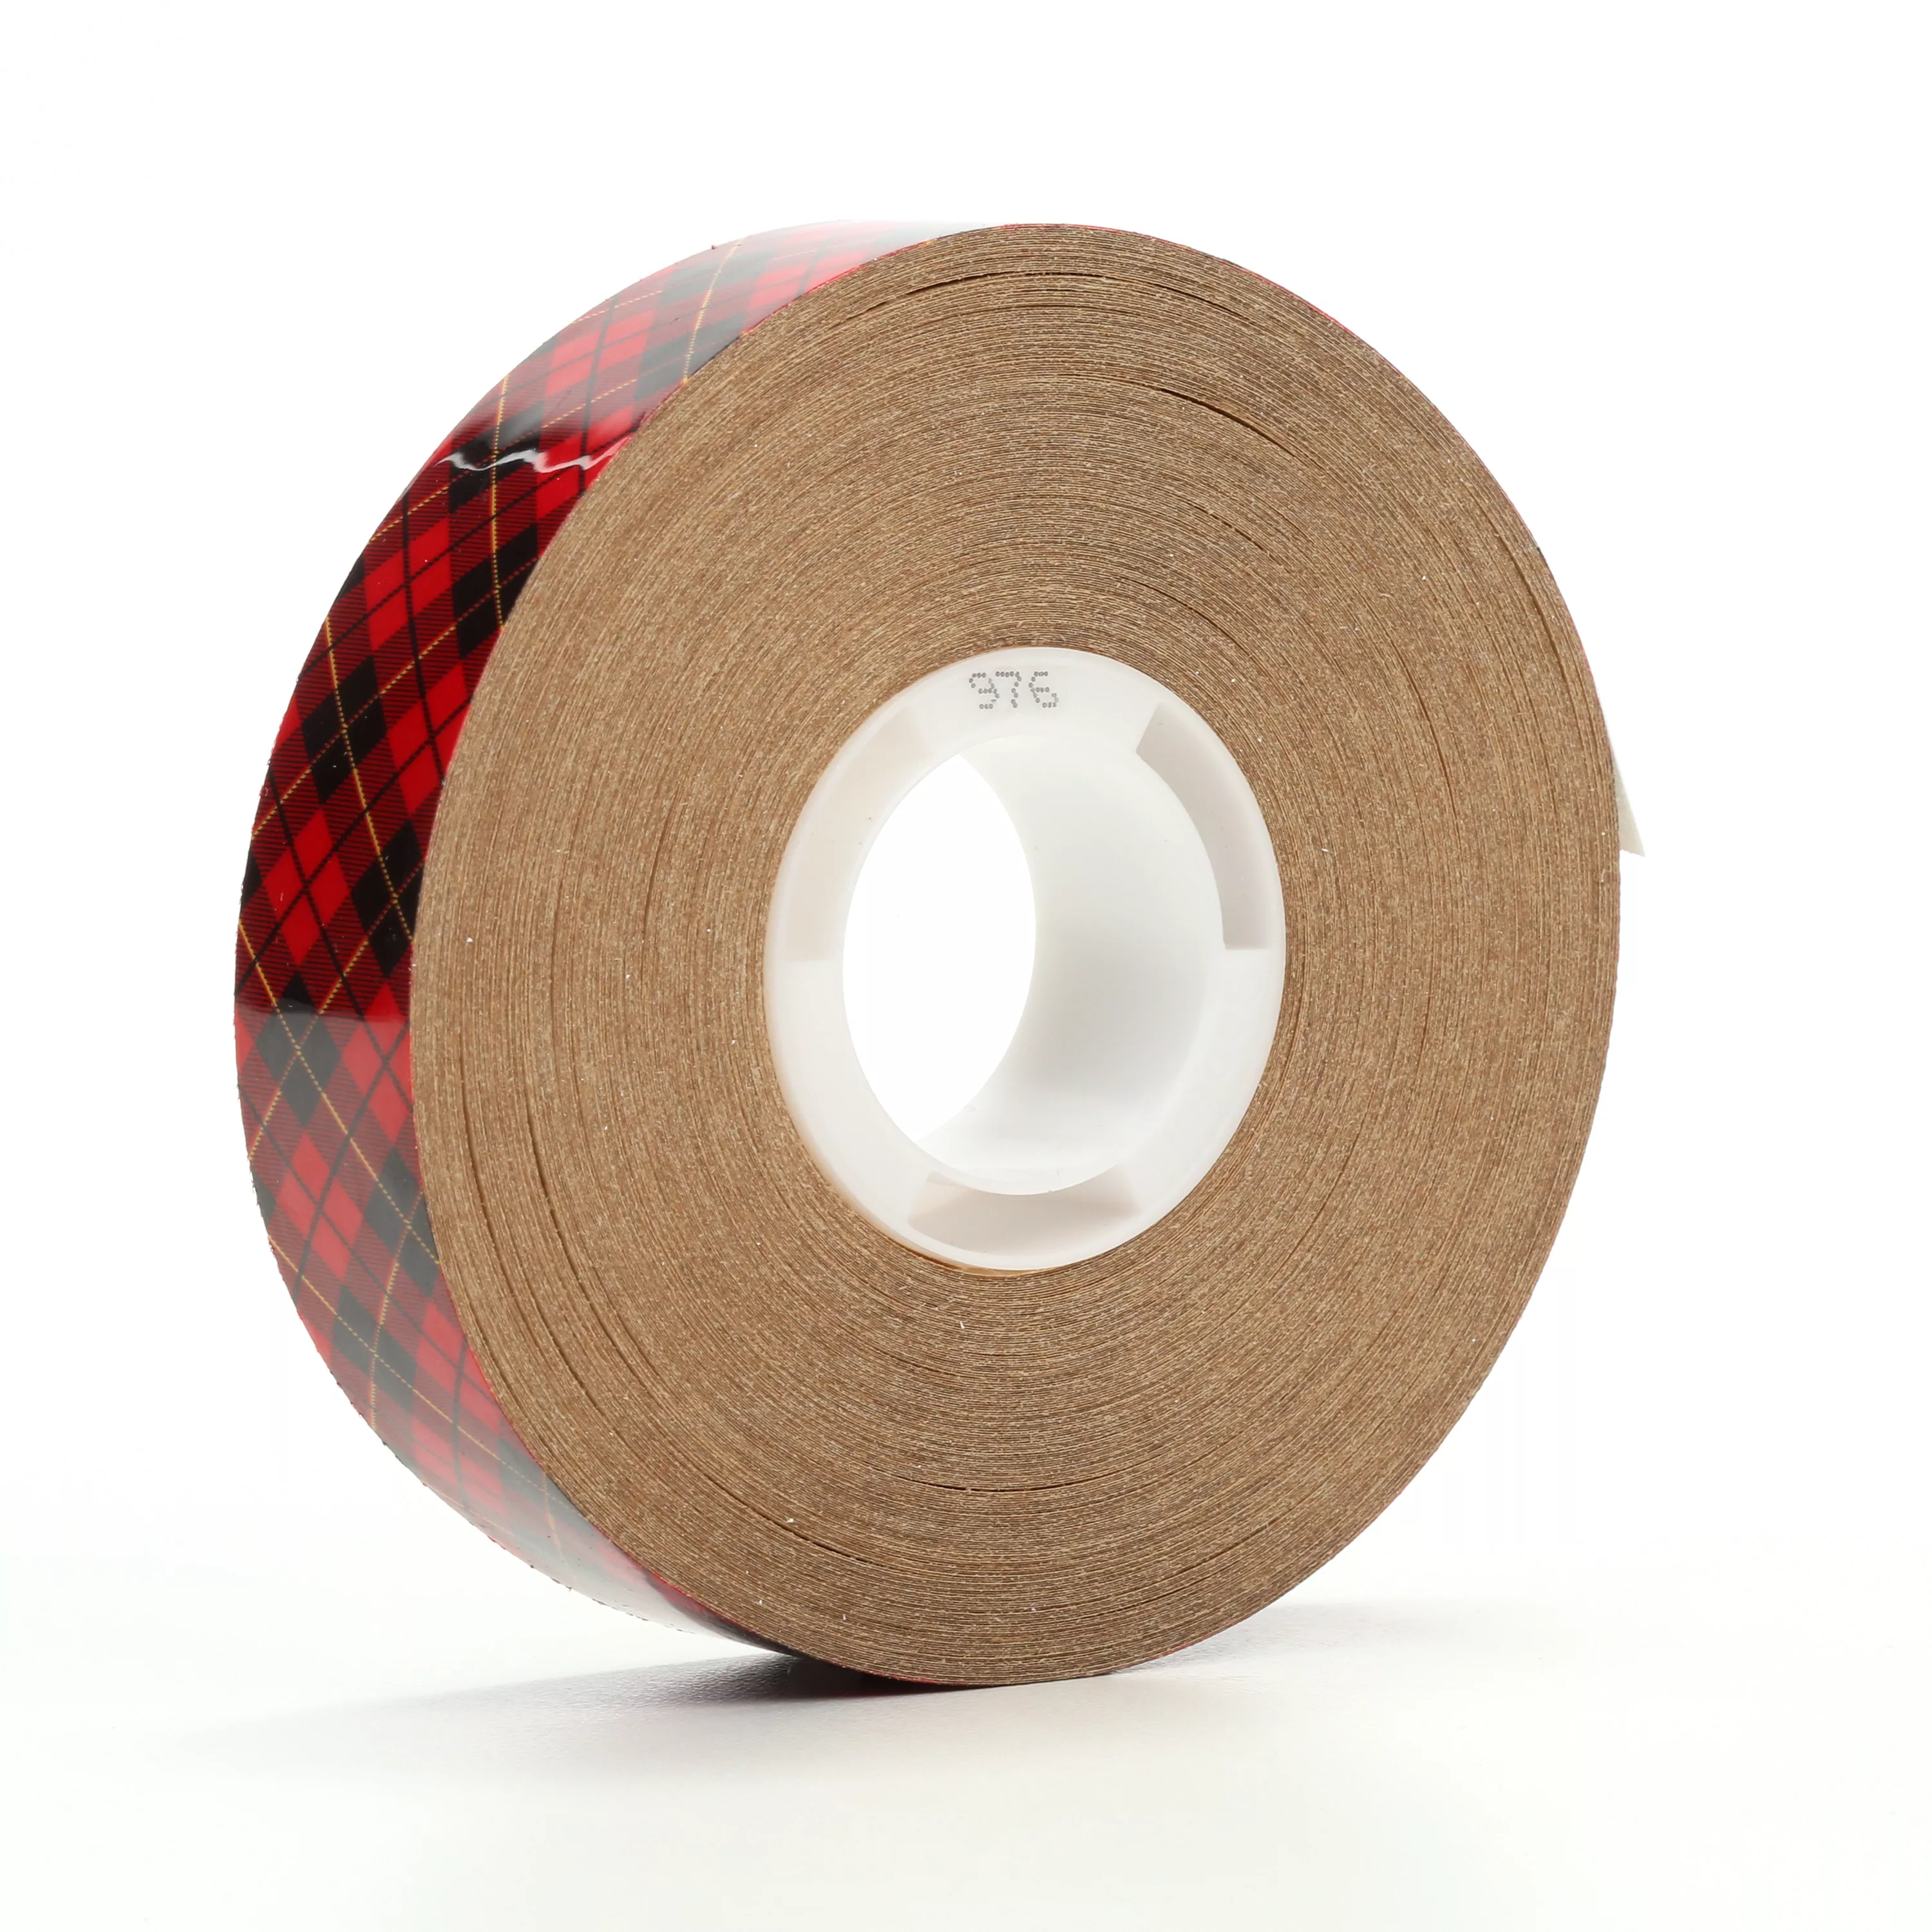 Product Number 976 | Scotch® ATG Adhesive Transfer Tape 976